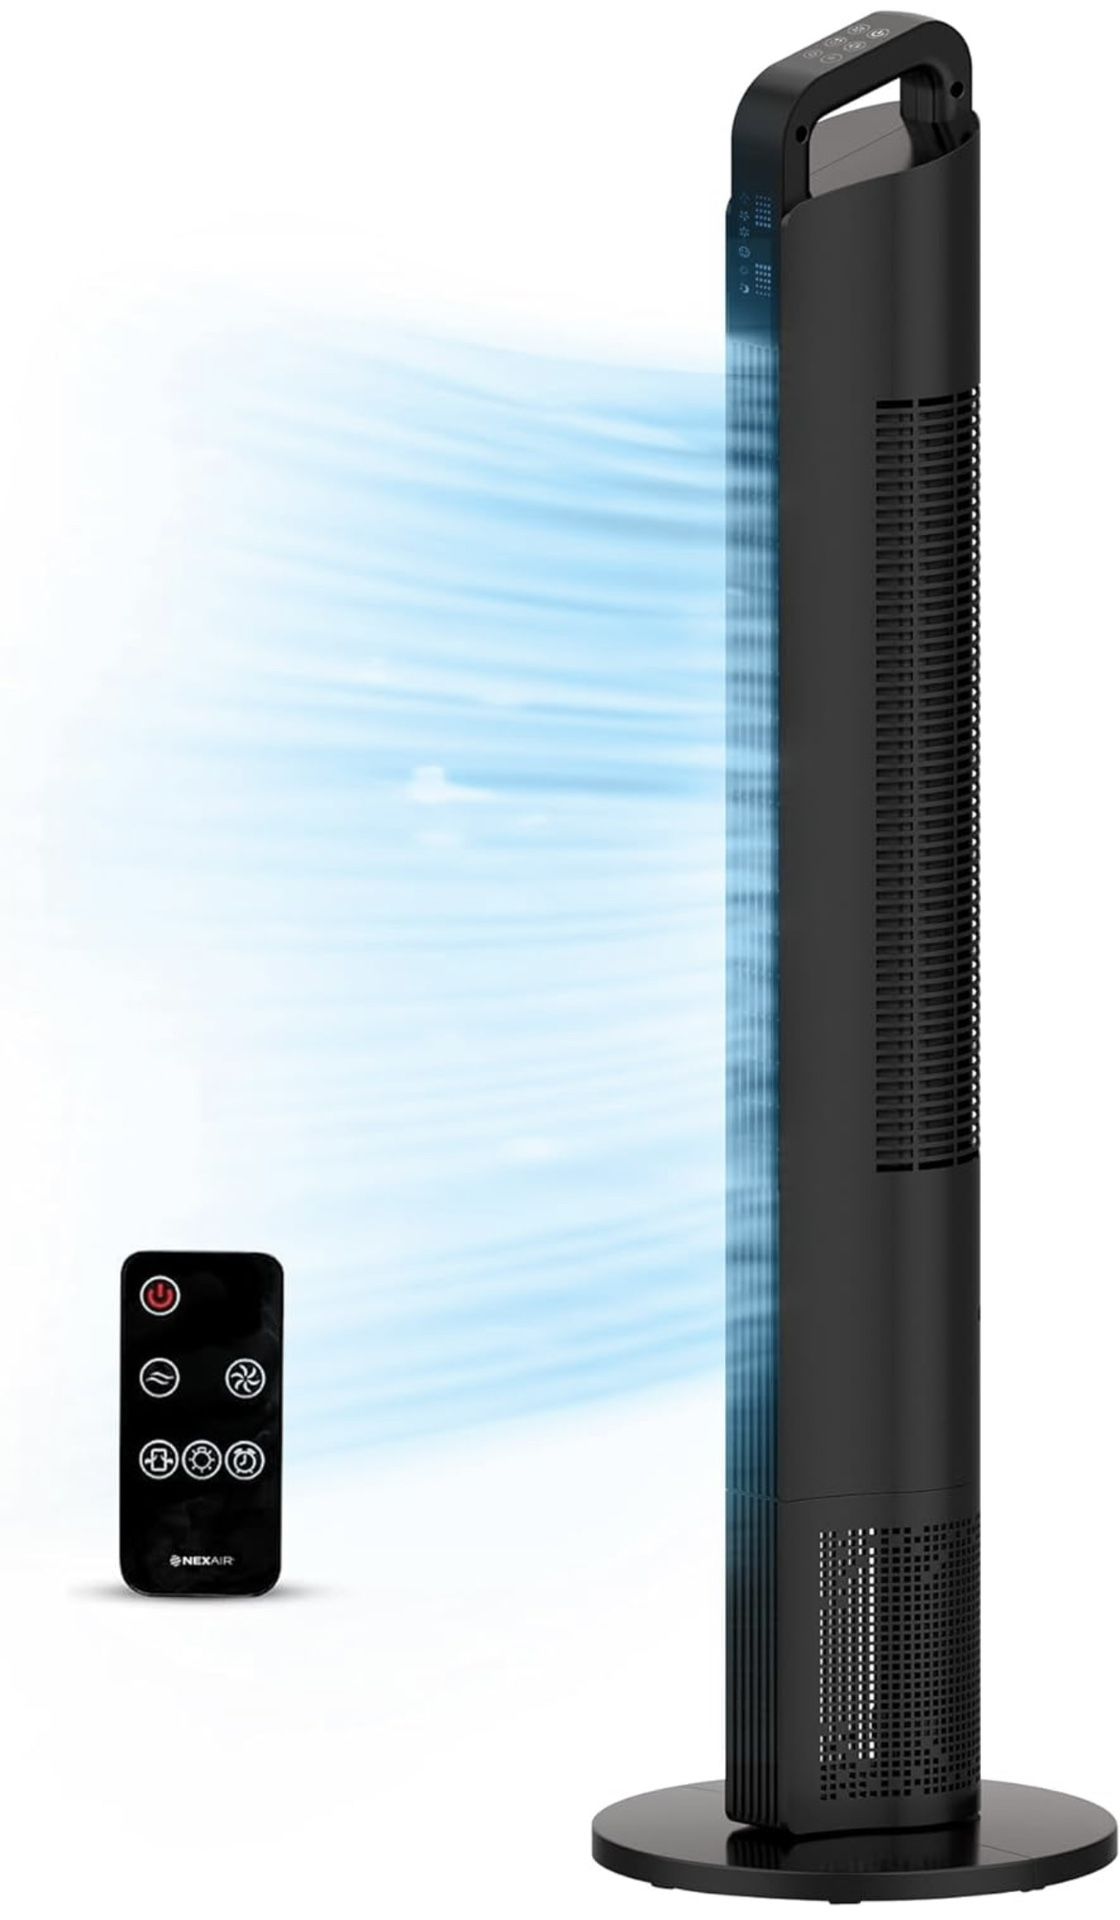 Oscillating Tower Fan With Remote